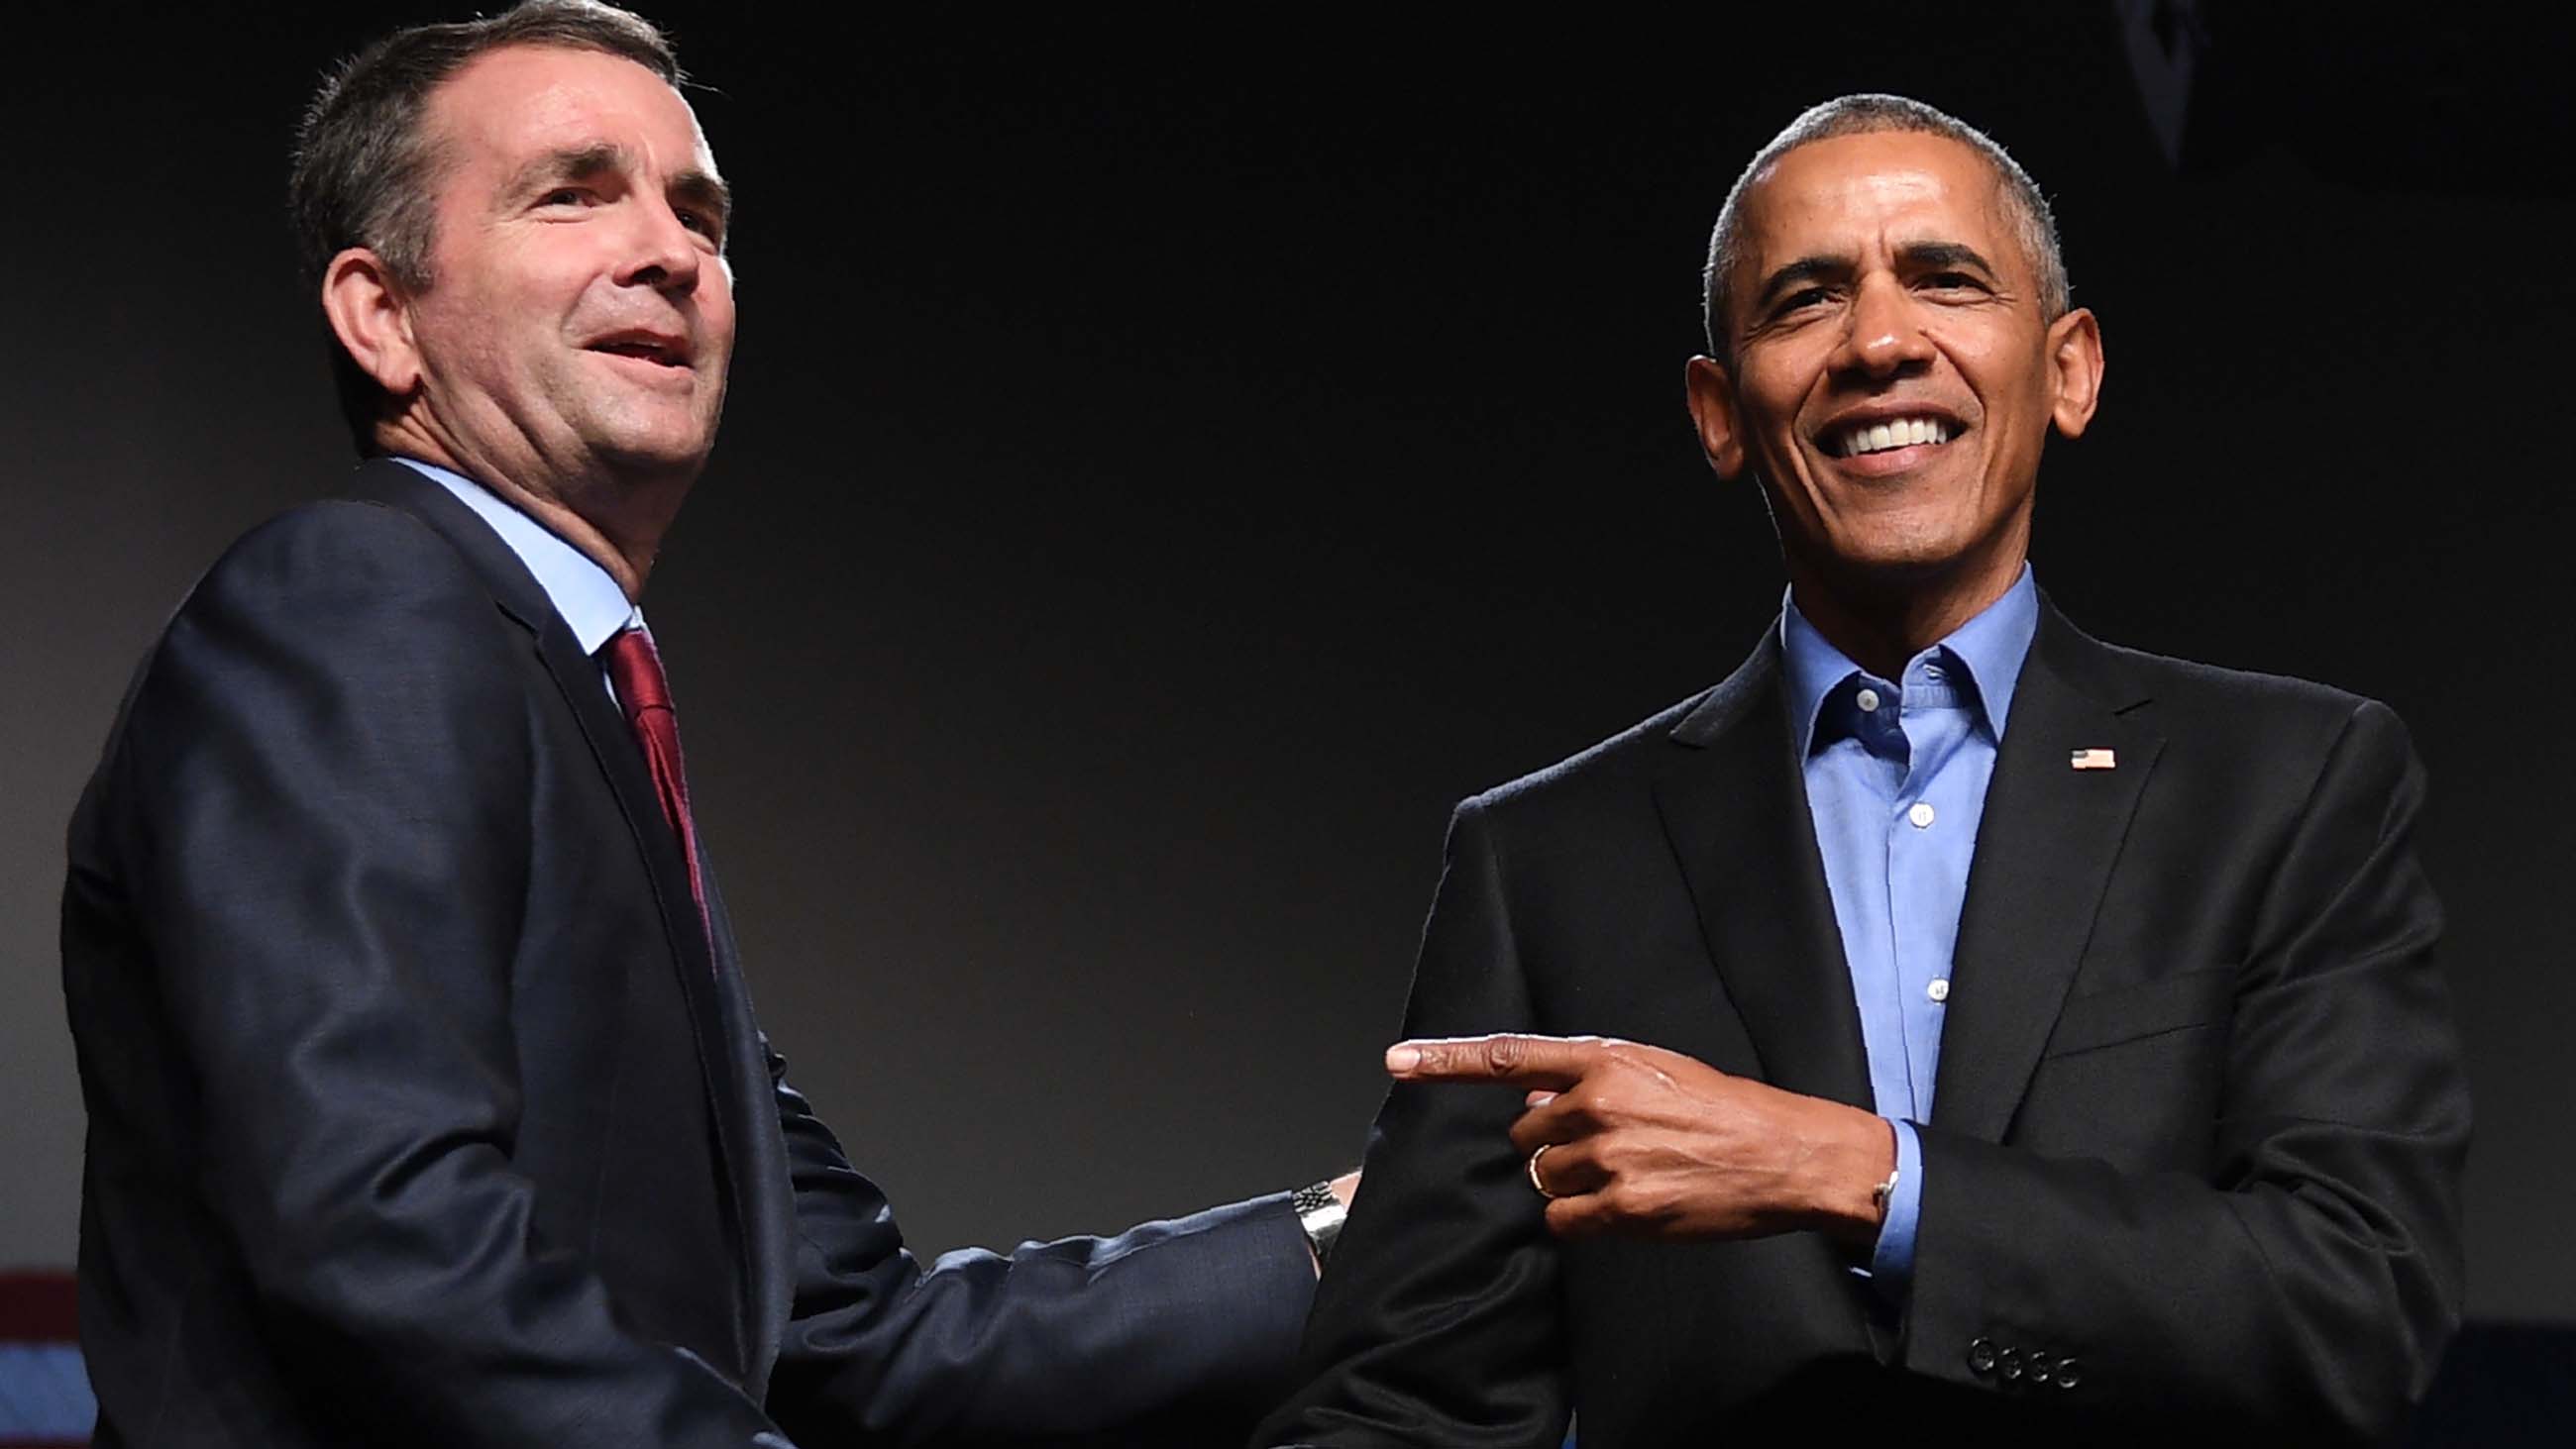 Ralph Northam, left, is Virginia’s next governor. But while he and other victorious Democrats may support Barack Obama’s climate policies, they can’t do much to bring them about.